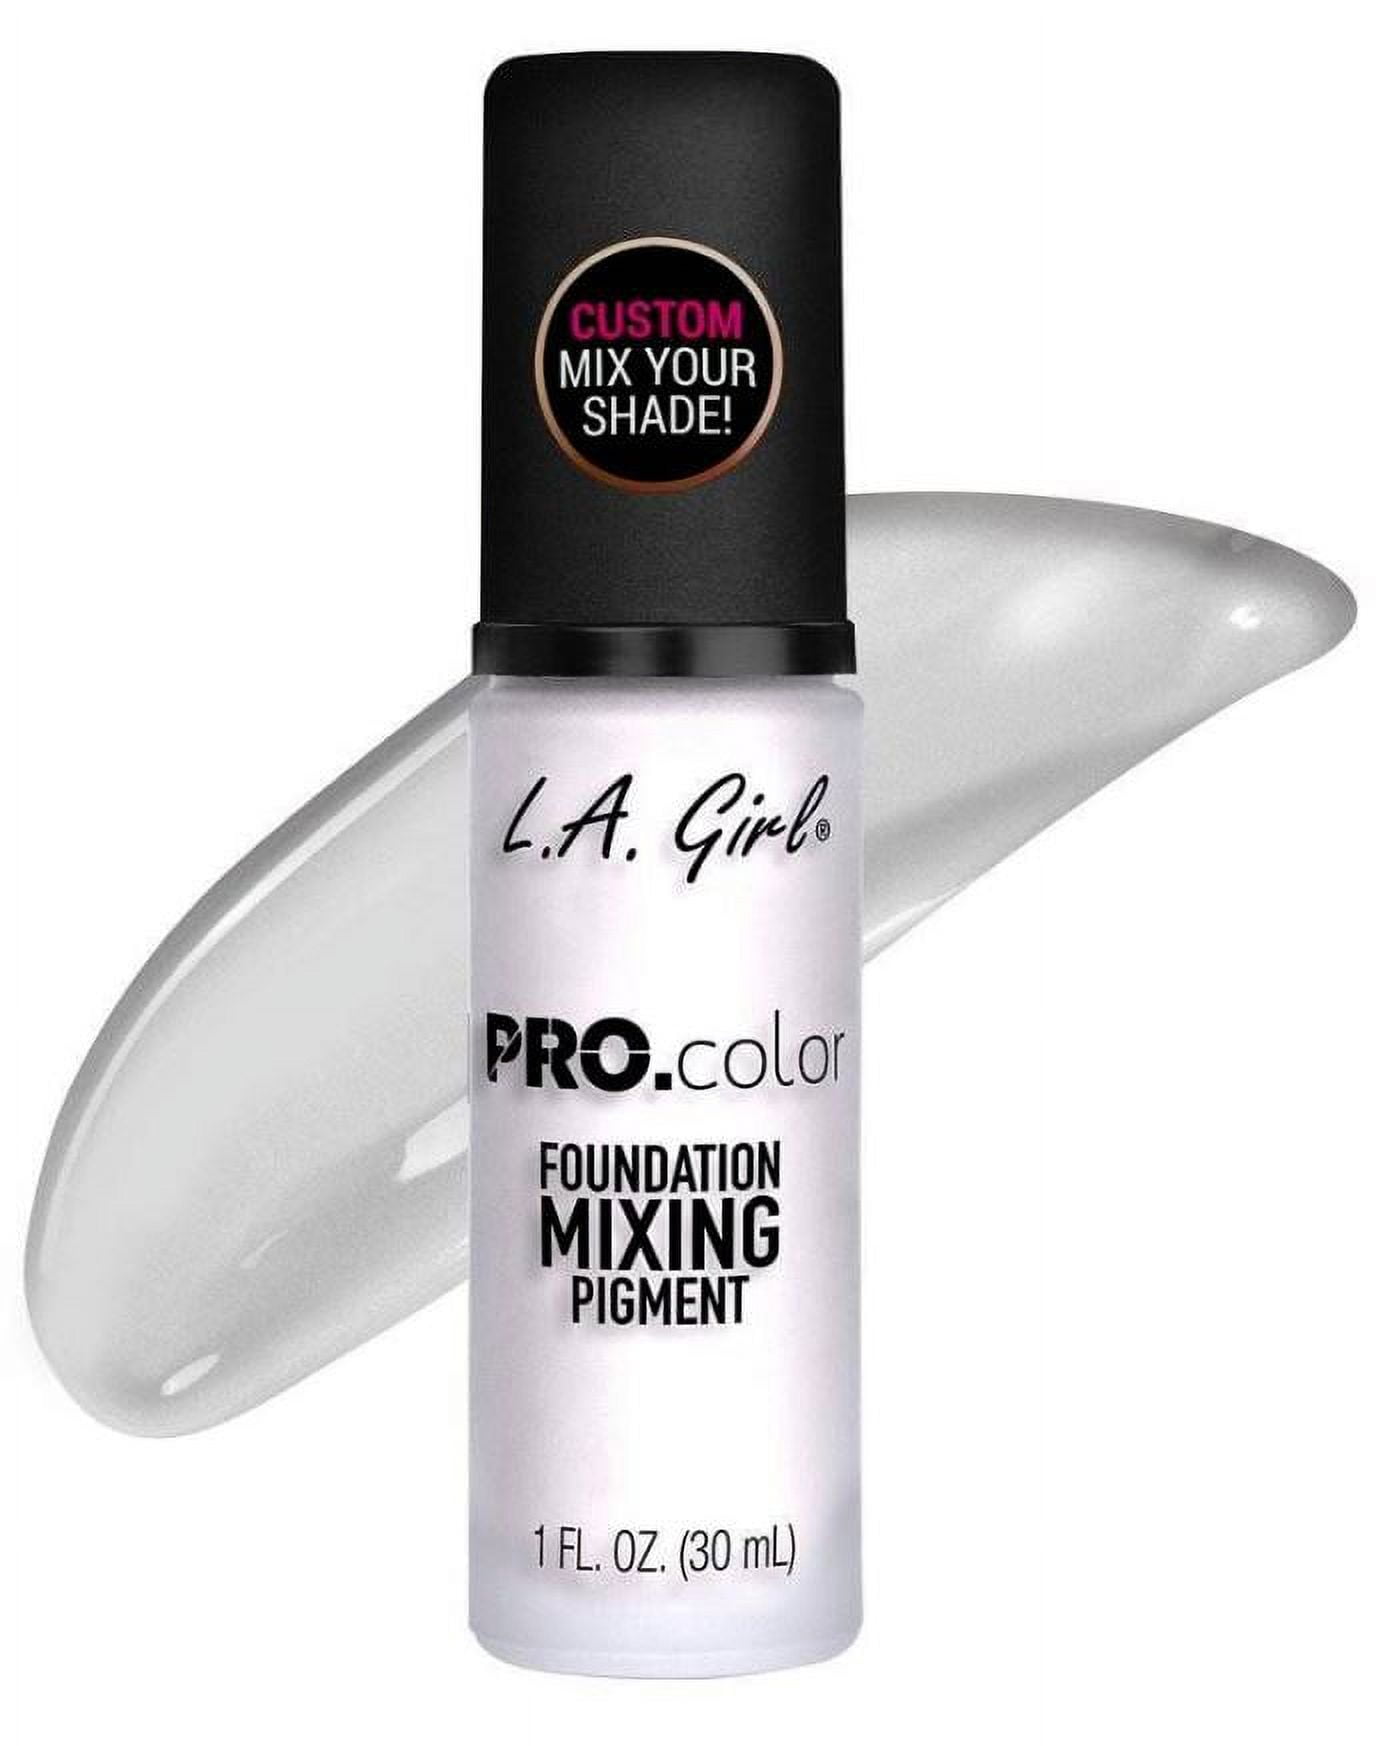 Reviewing @L.A. Girl Cosmetics White Foundation Mixing Pigment! 🥰💁🏼